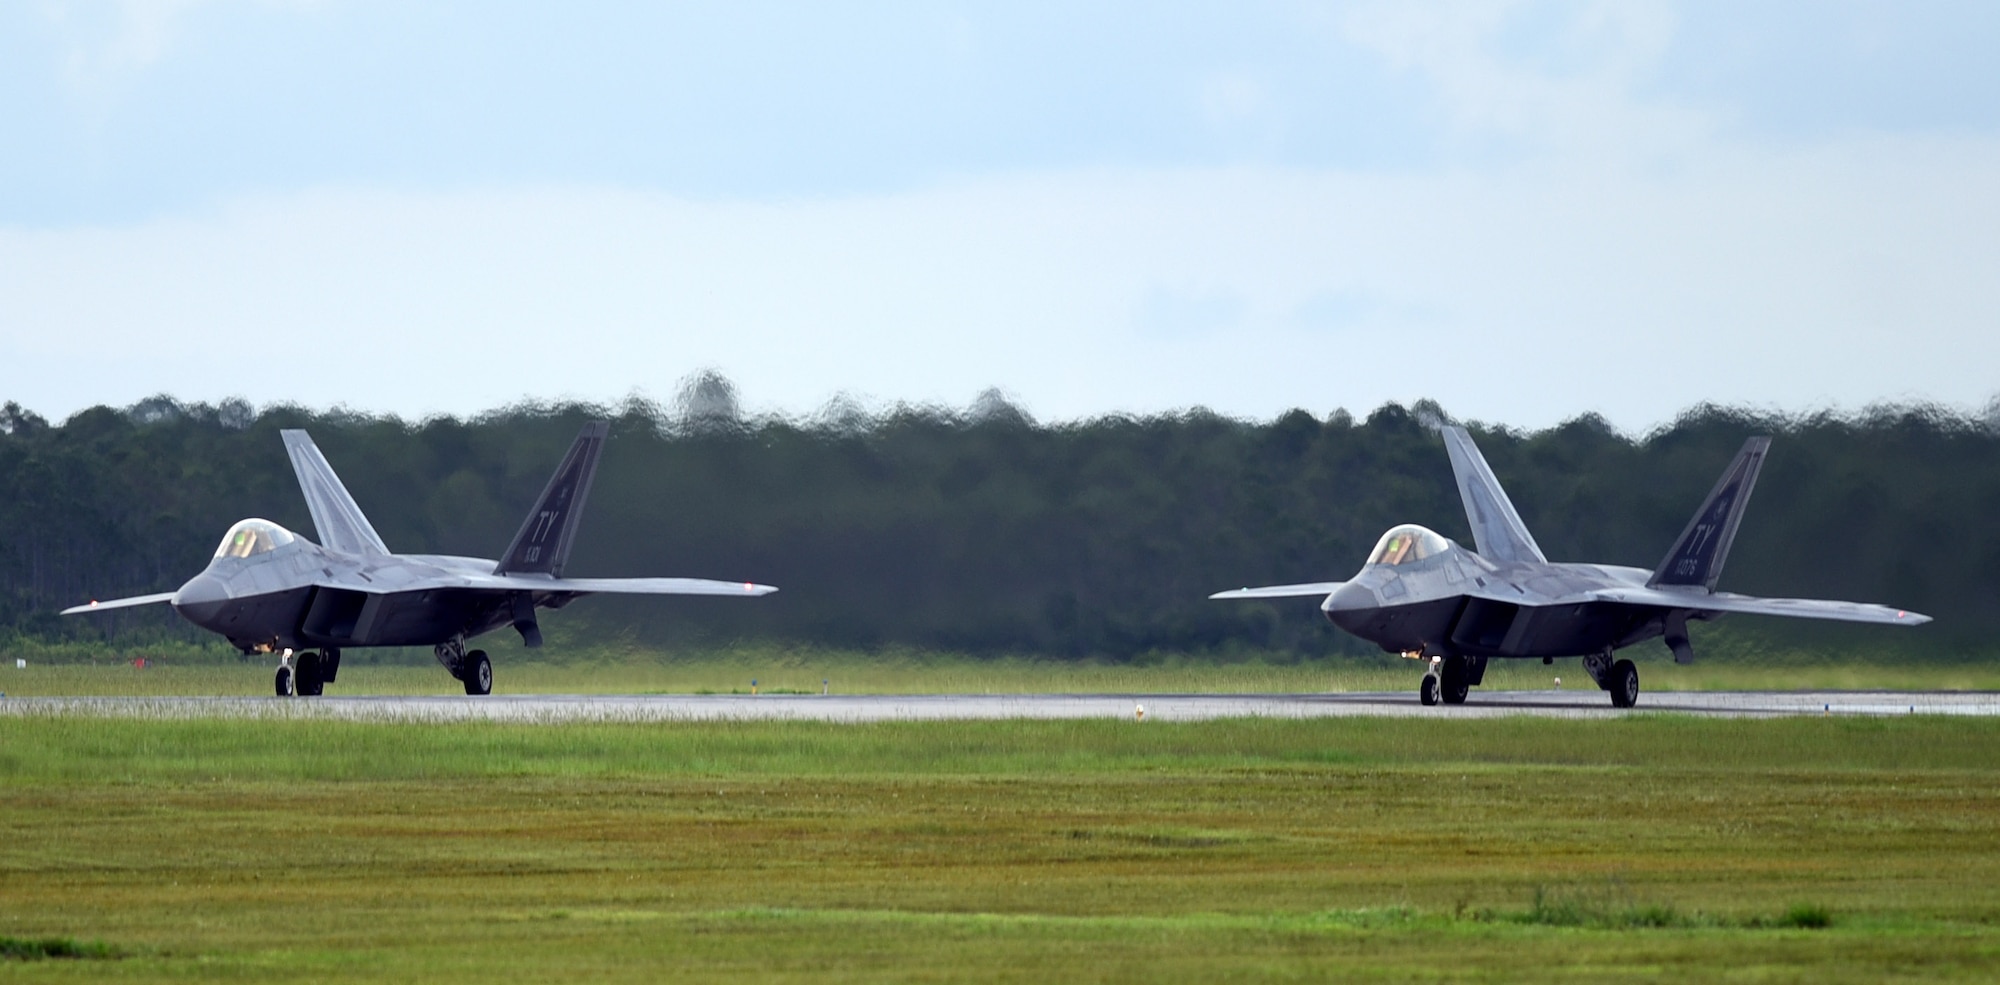 A pair of 95th Fighter Squadron F-22 Raptors prepare for takeoff at Tyndall Air Force Base, Fla., June 14, 2018. The aircraft were launched during a Phase II deployment exercise designed to simulate real-world tactics while testing the ability of maintenance teams and pilots to project unrivaled combat airpower at a moment’s notice. (U.S. Air Force photo by Airman 1st Class Isaiah J. Soliz)